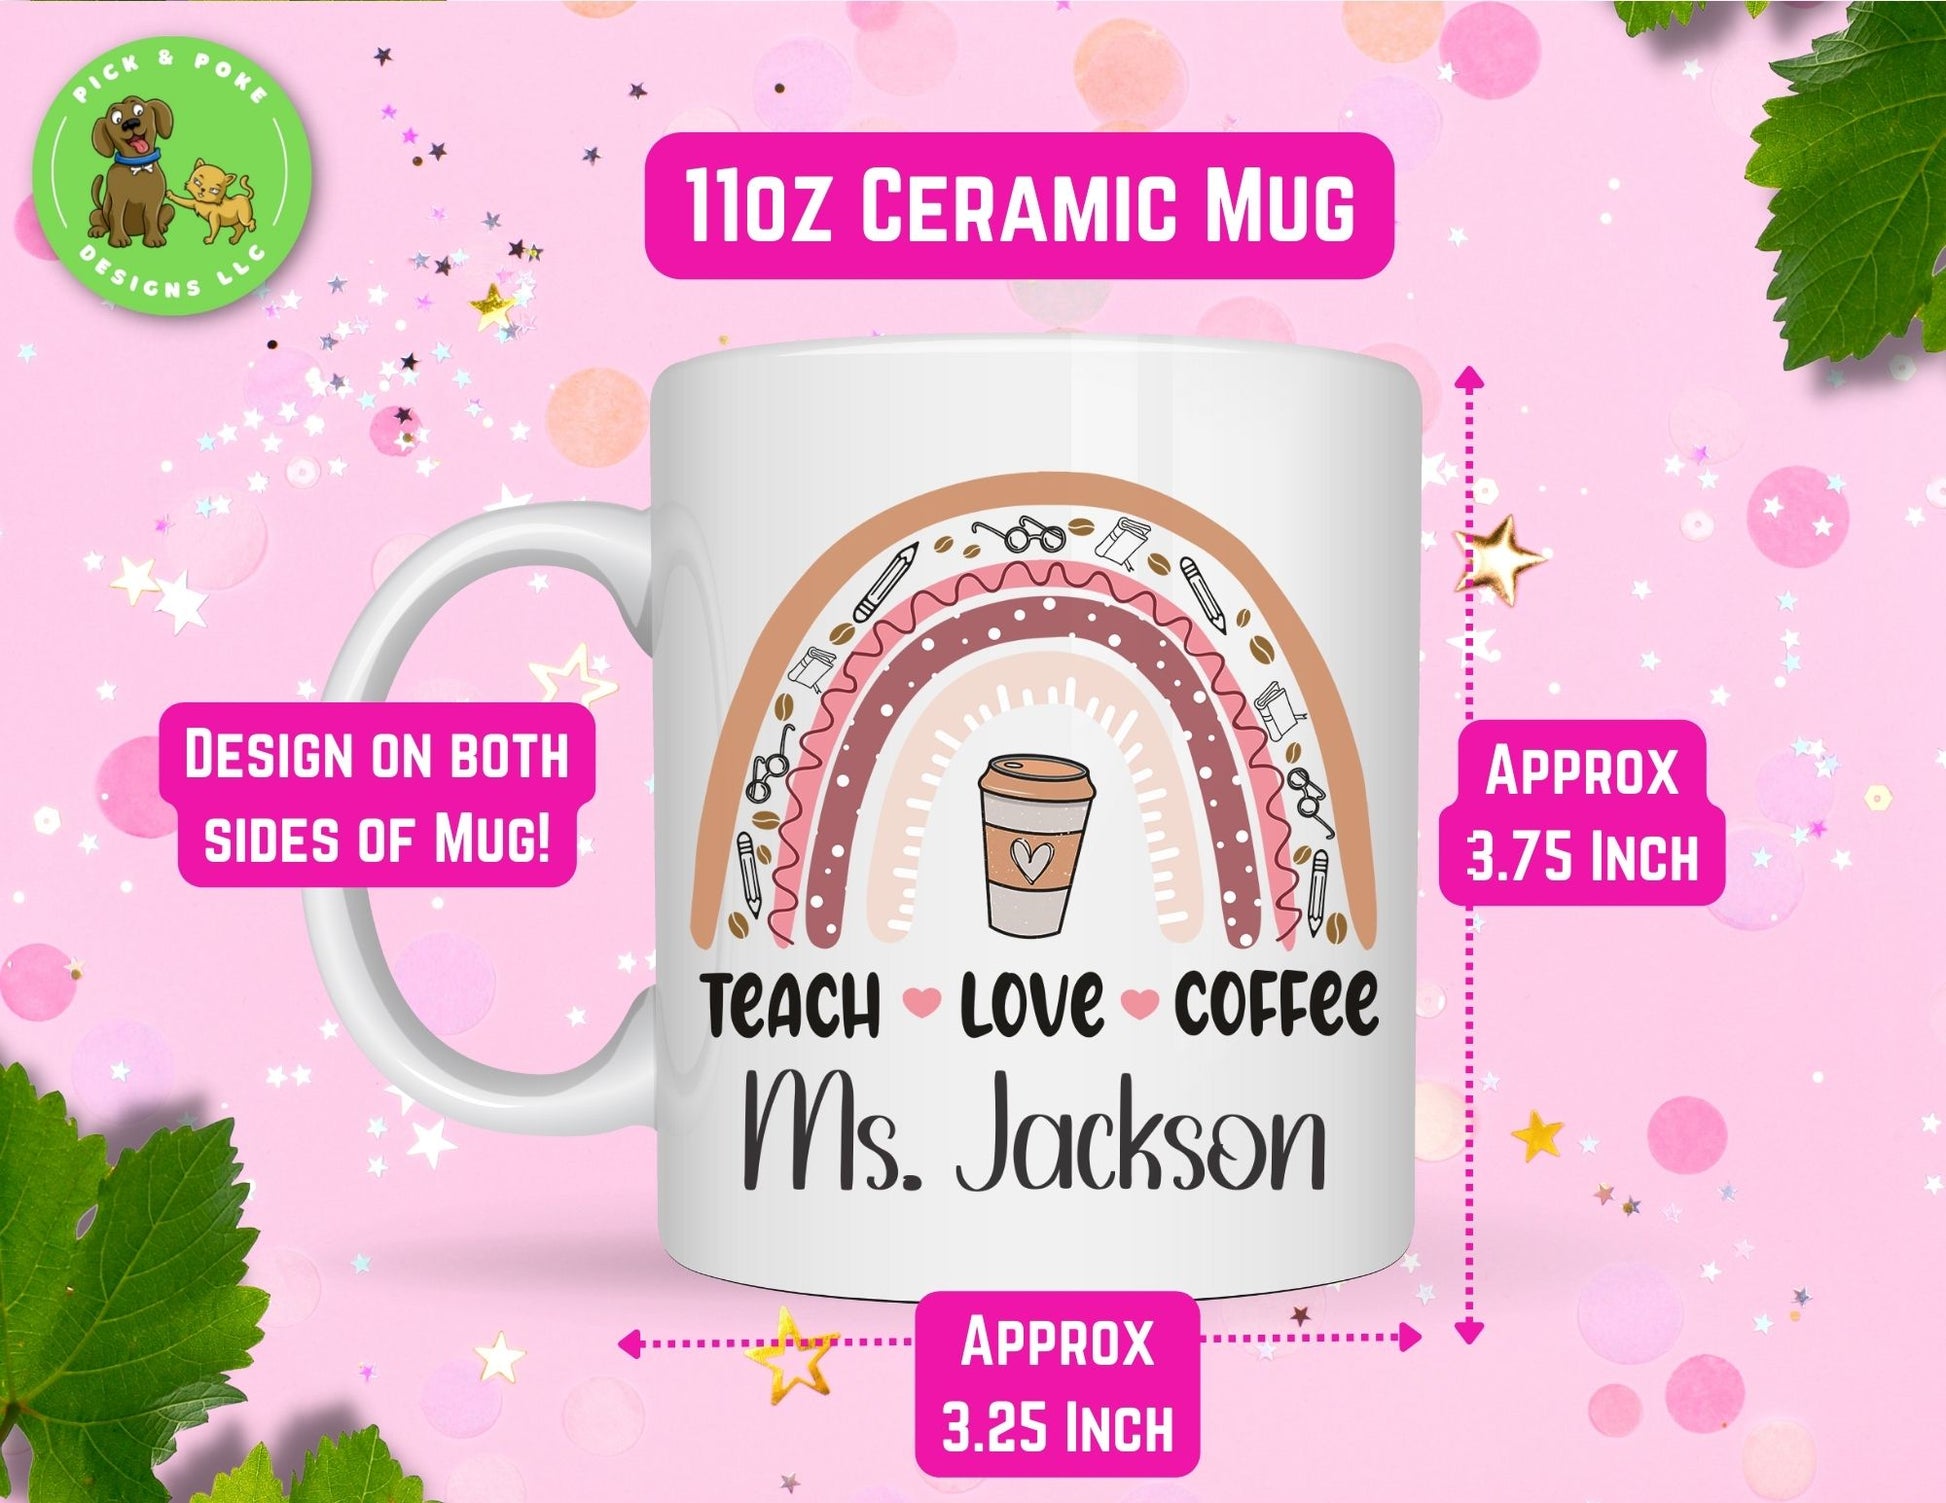 Teach Love Coffee Mug holds 11oz ounces and is made from ceramic material.